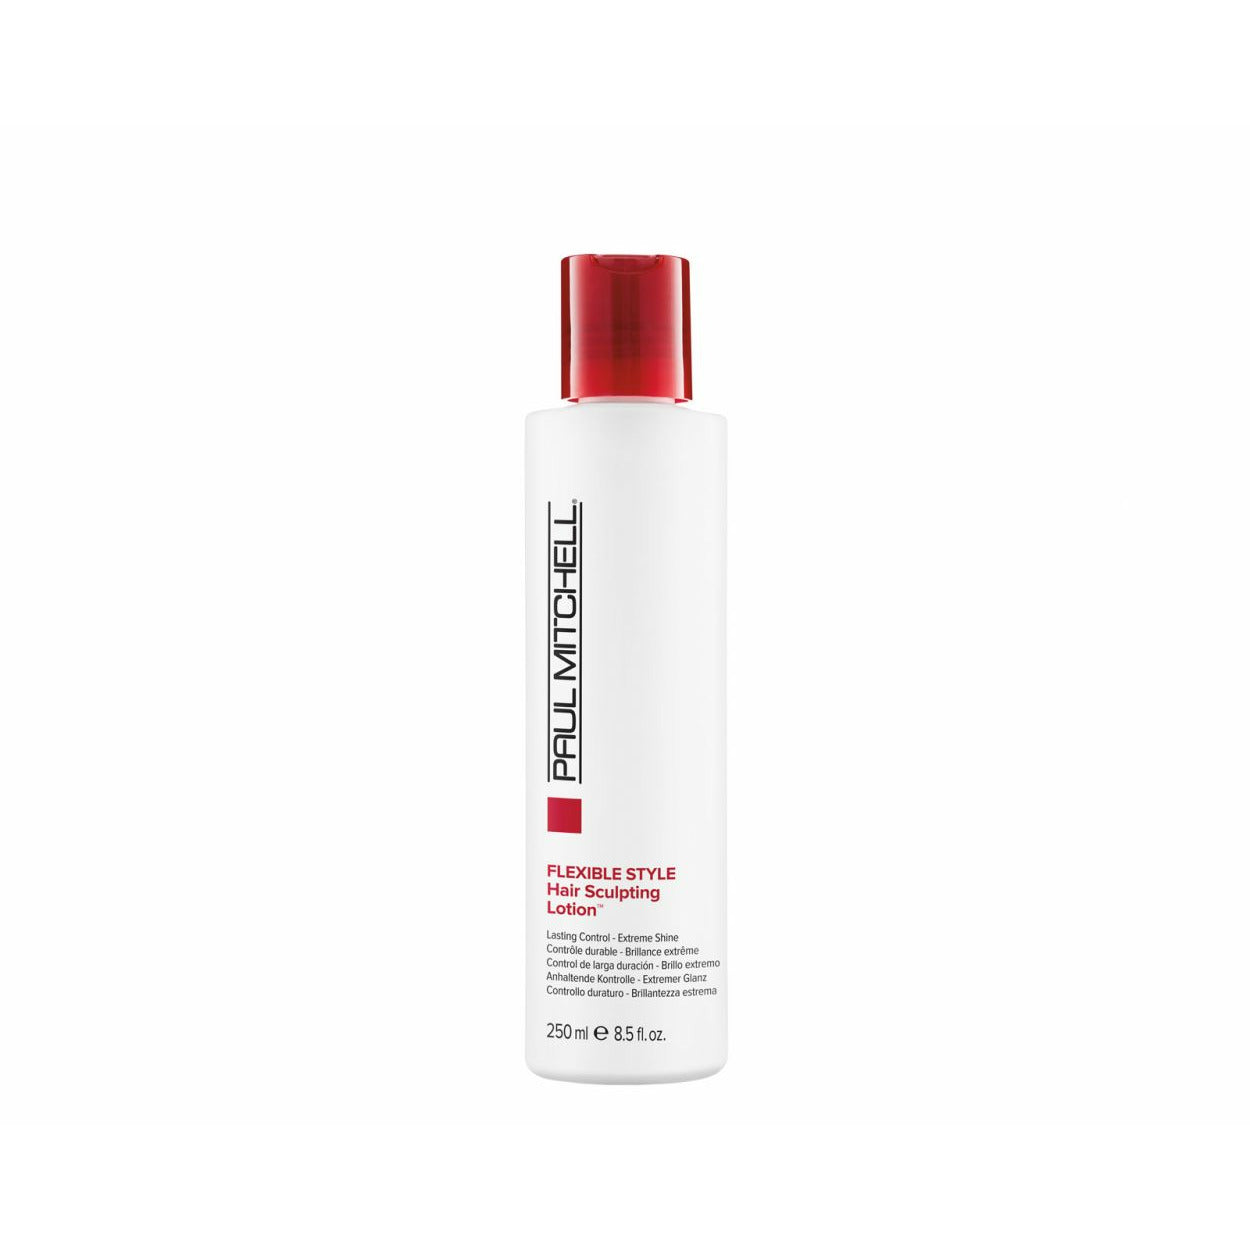 Paul Mitchell Flexible Style Hair Sculpting Lotion, 8.5 oz.